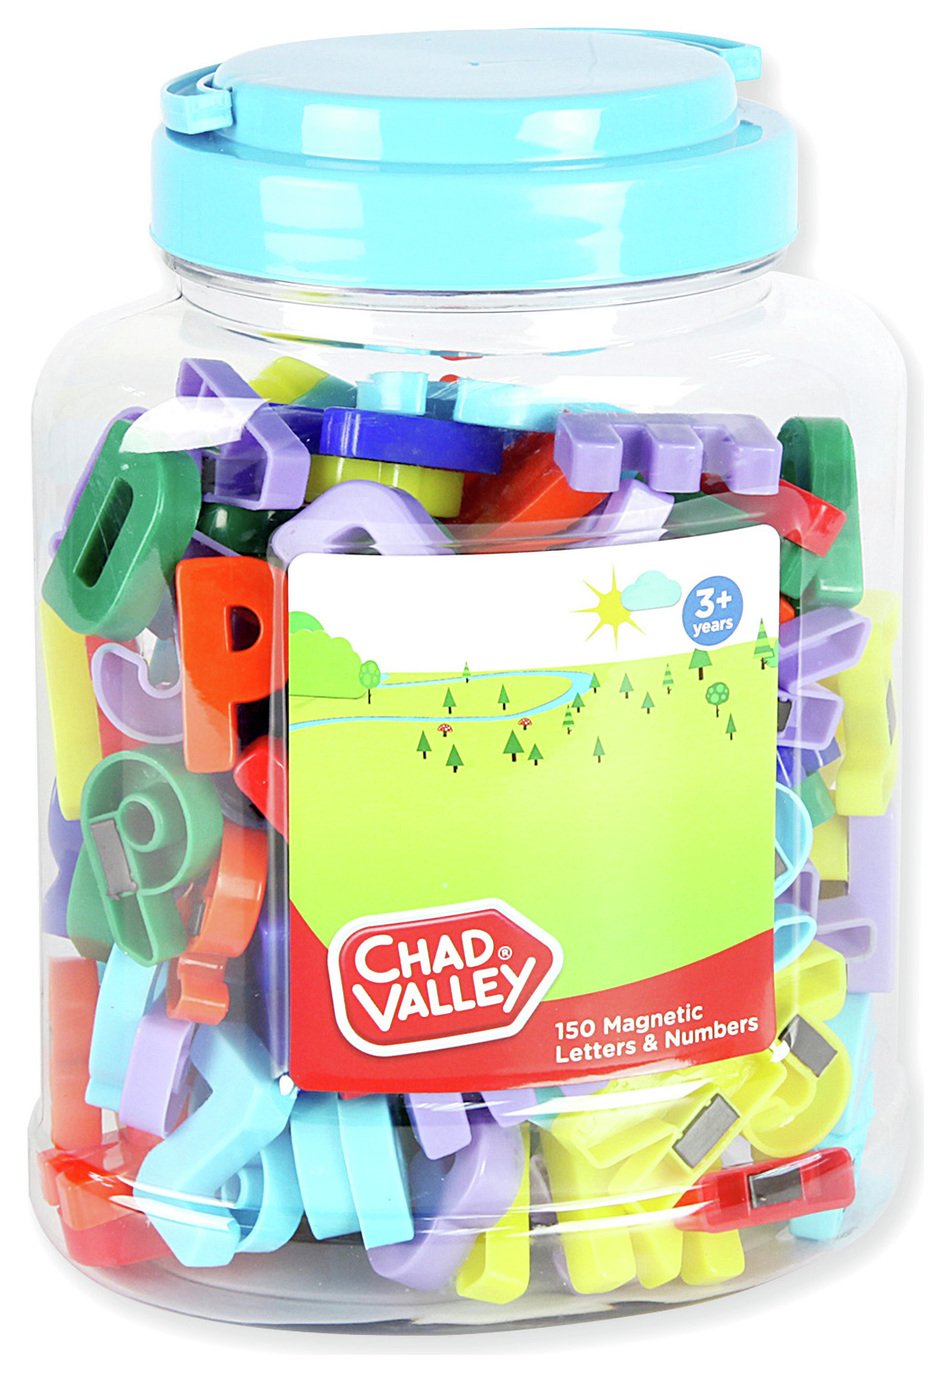 Chad Valley PlaySmart Magnetic Letters Set